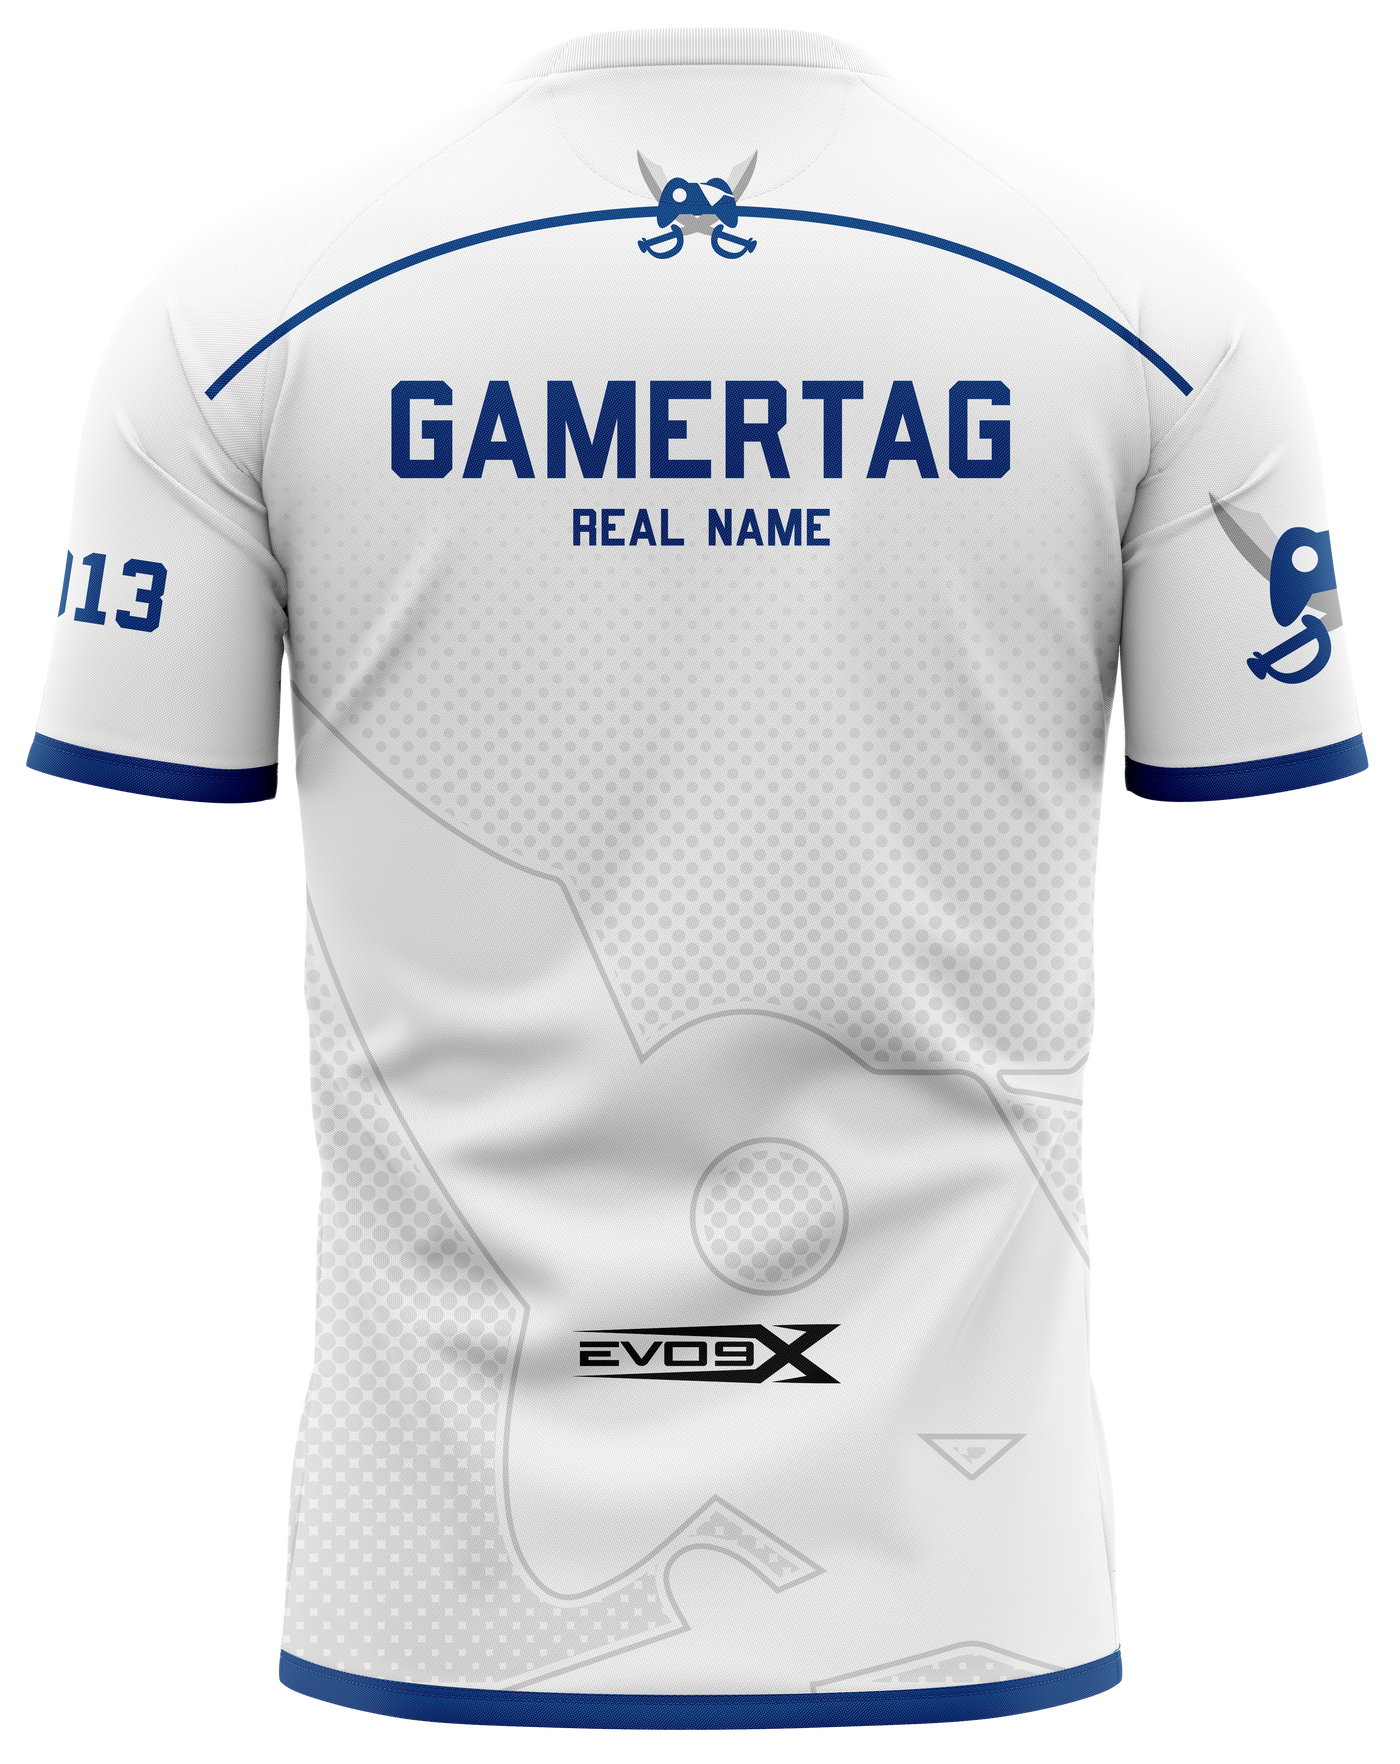 The Gaming Sector Pro Jersey